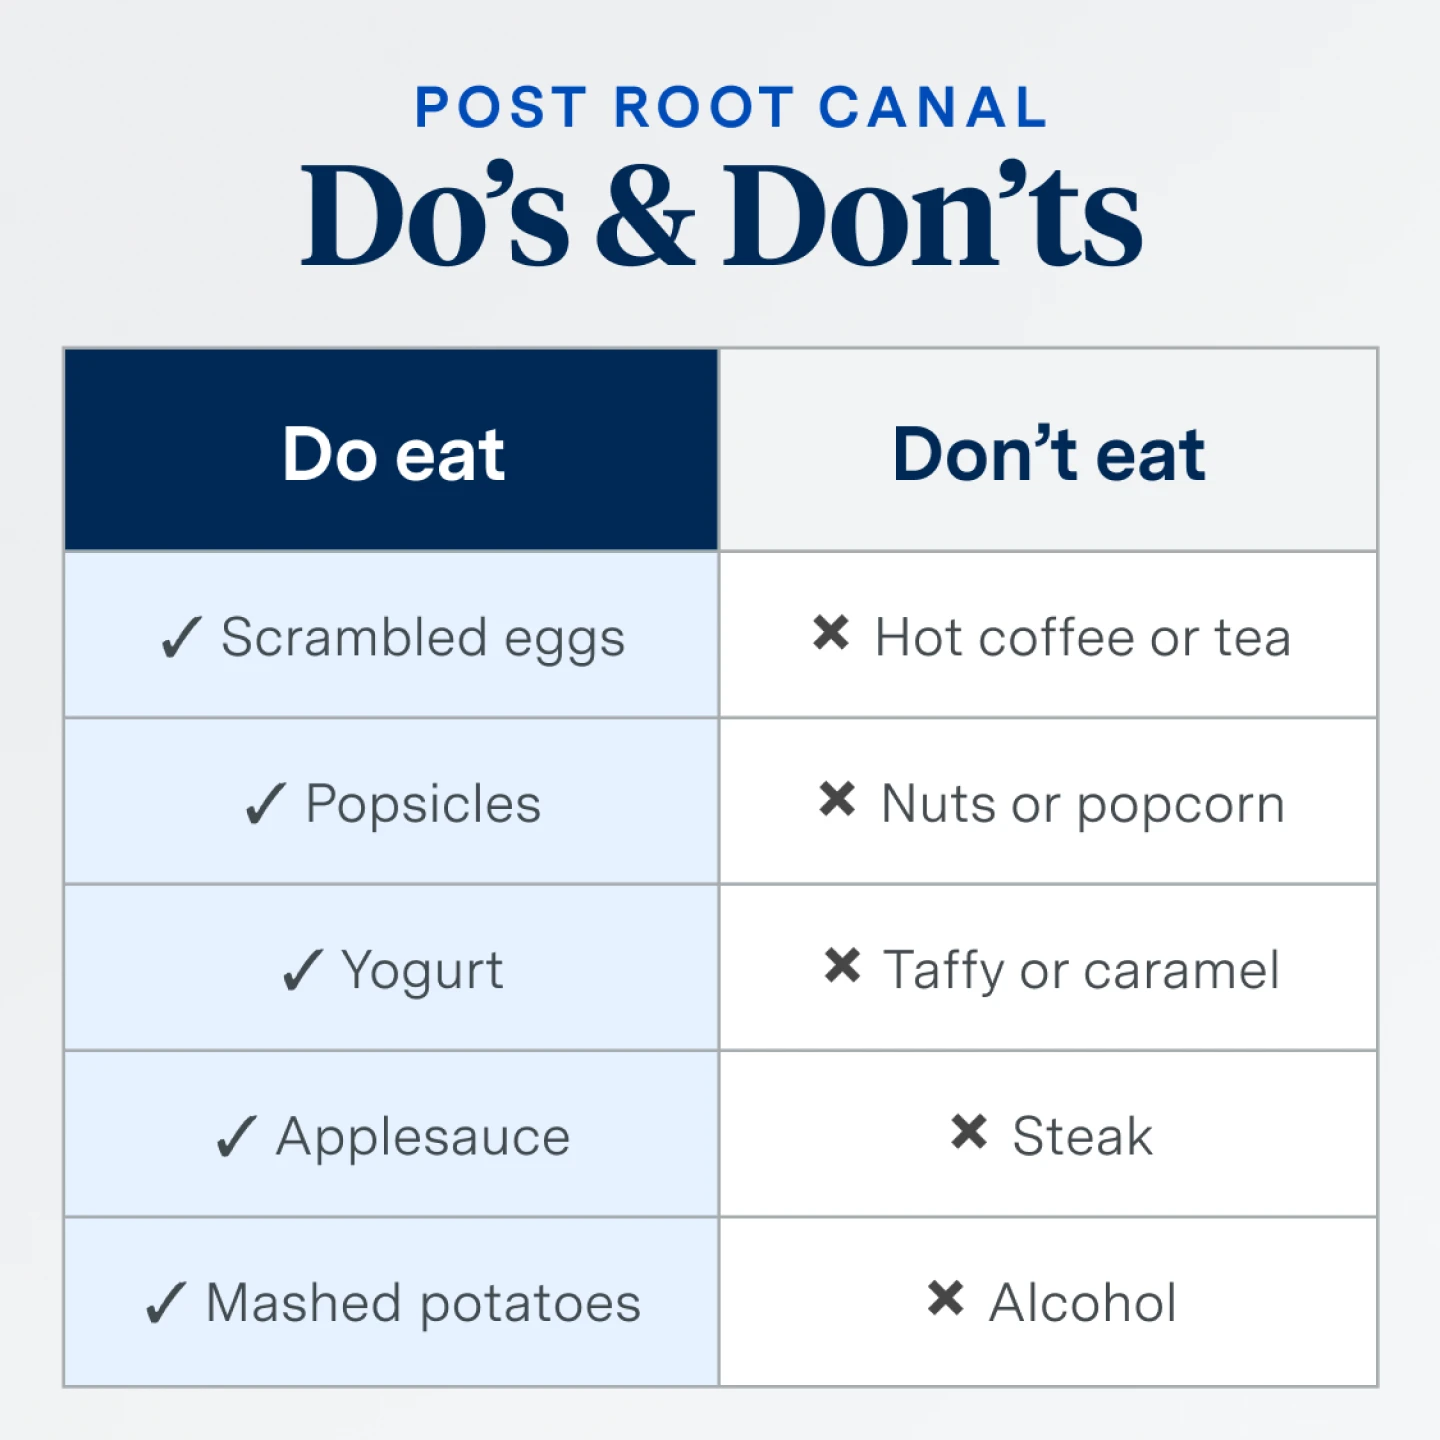 Post root canal dos and don'ts. 